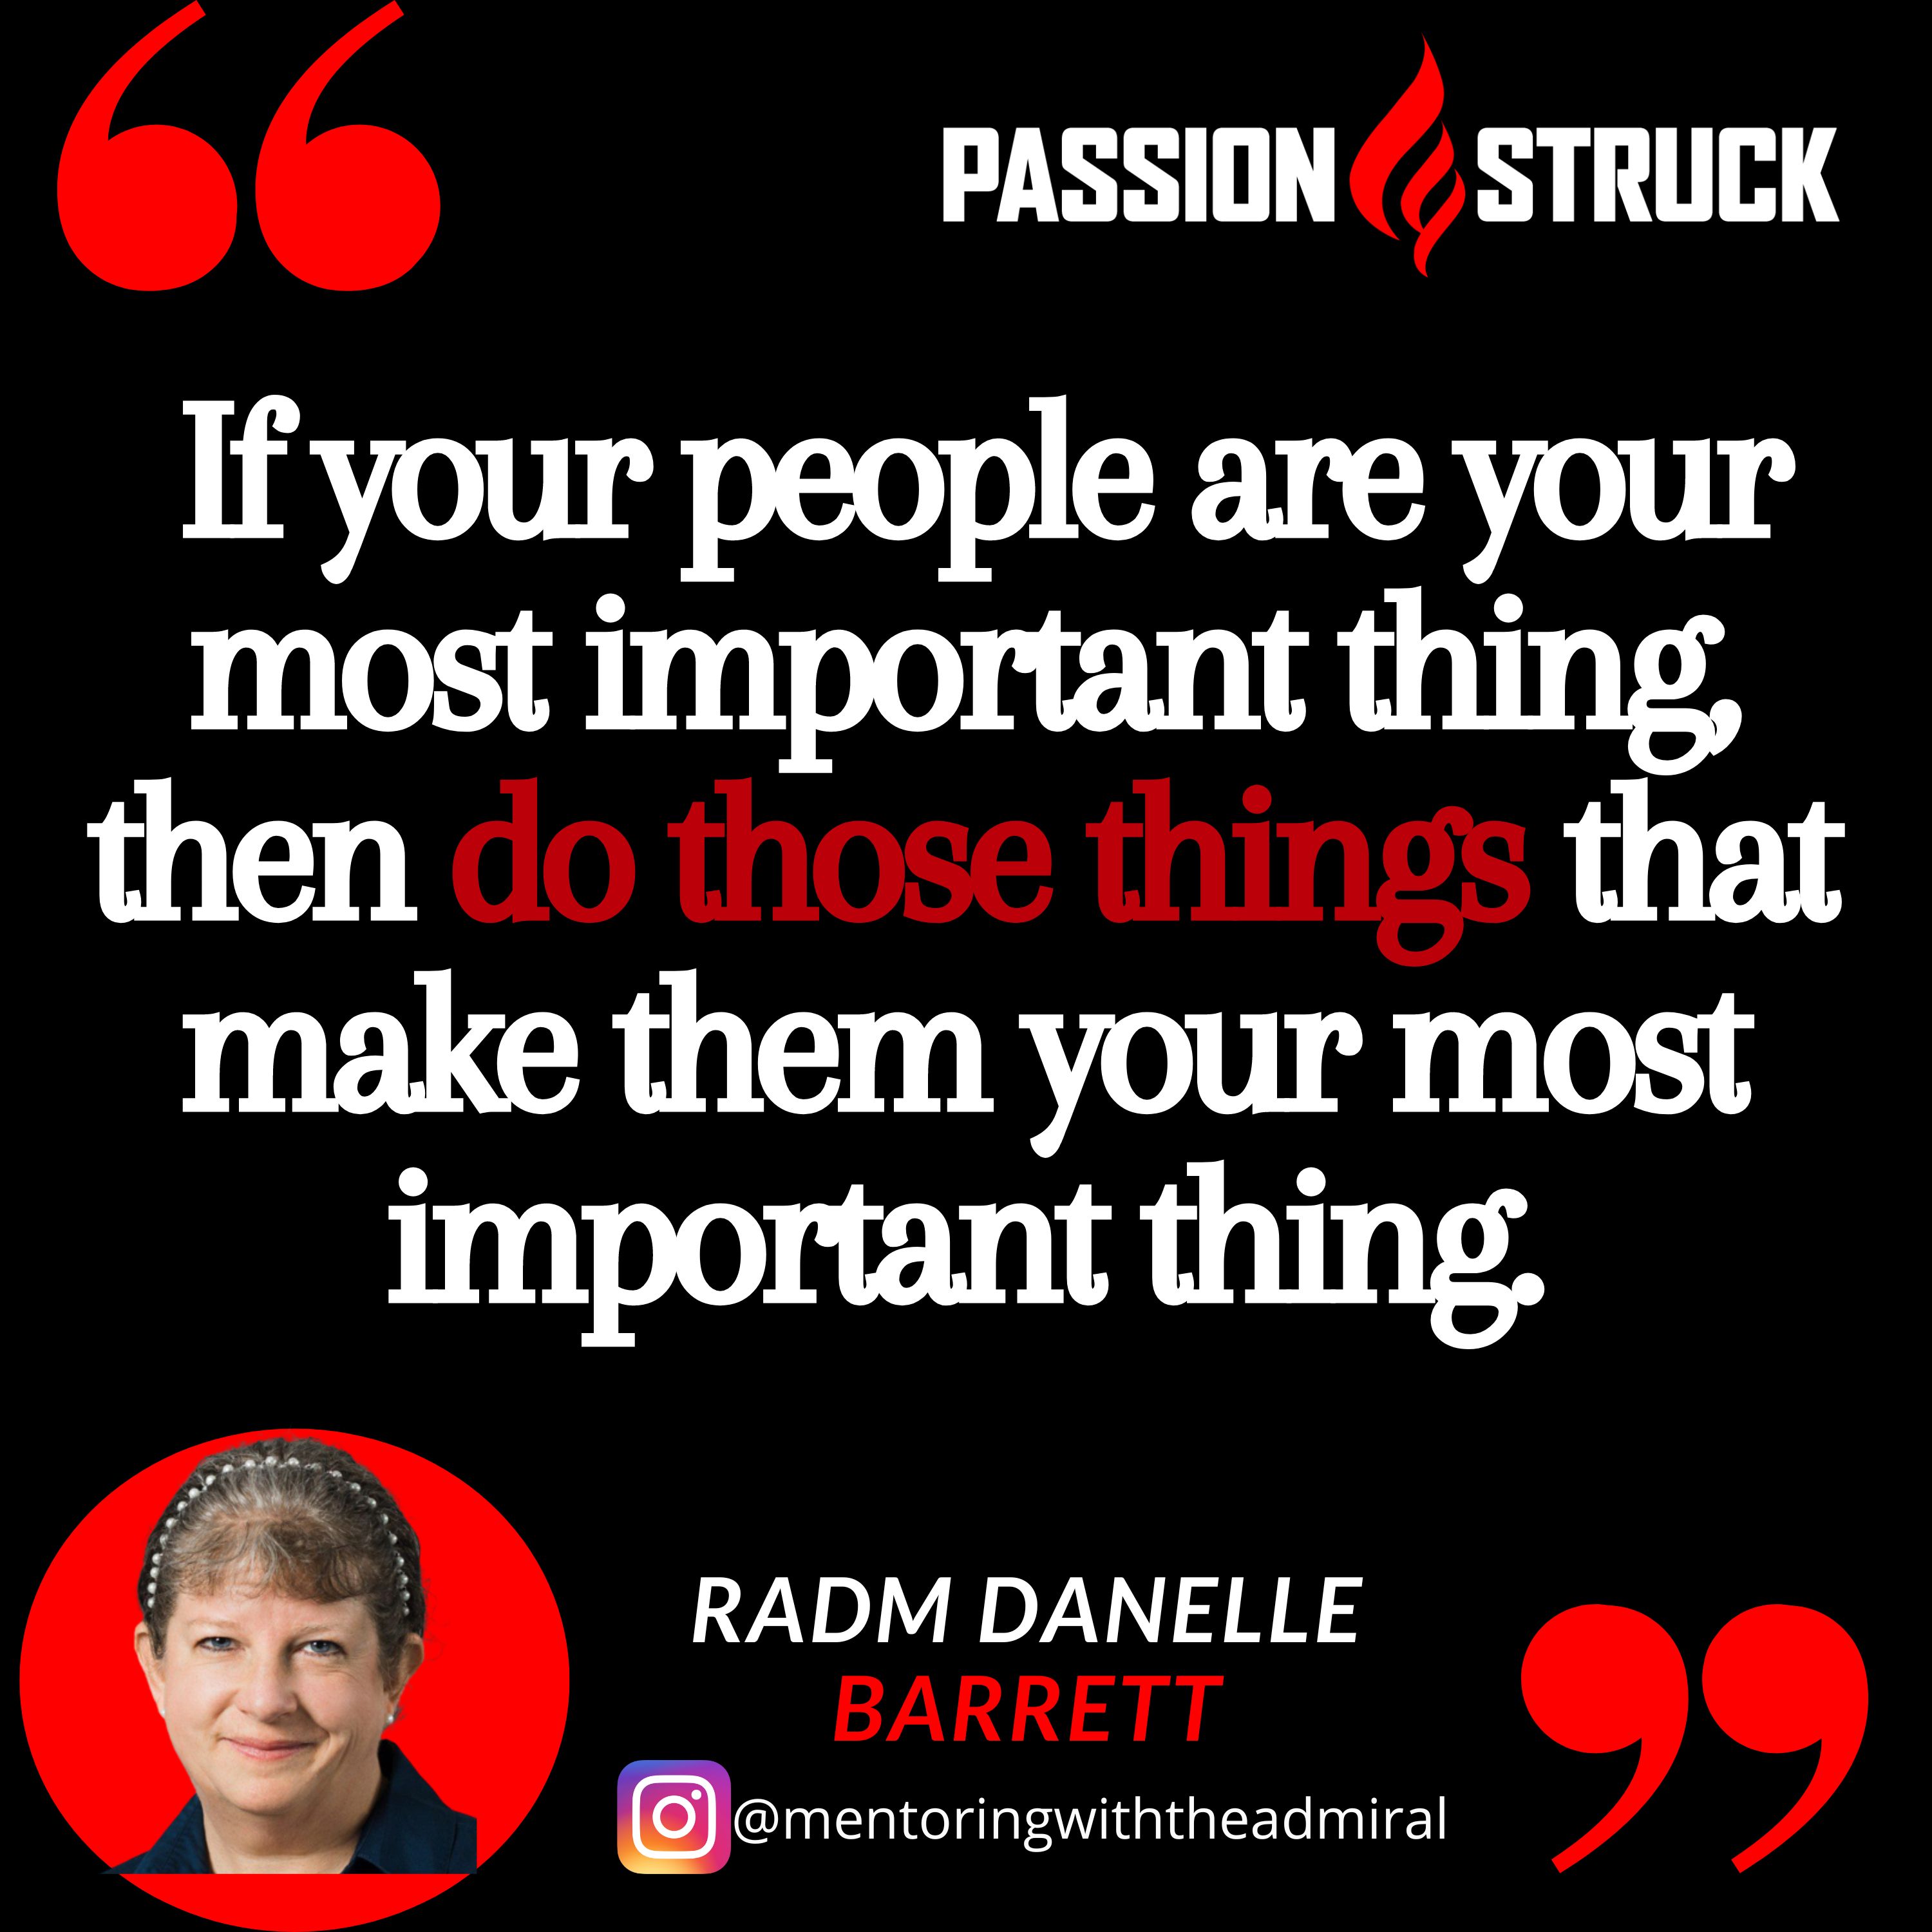 Quote from Rear Admiral Danelle Barrett from the Passion Struck Podcast: "If your people are your most important thing, then do those things that make them your most important thing."